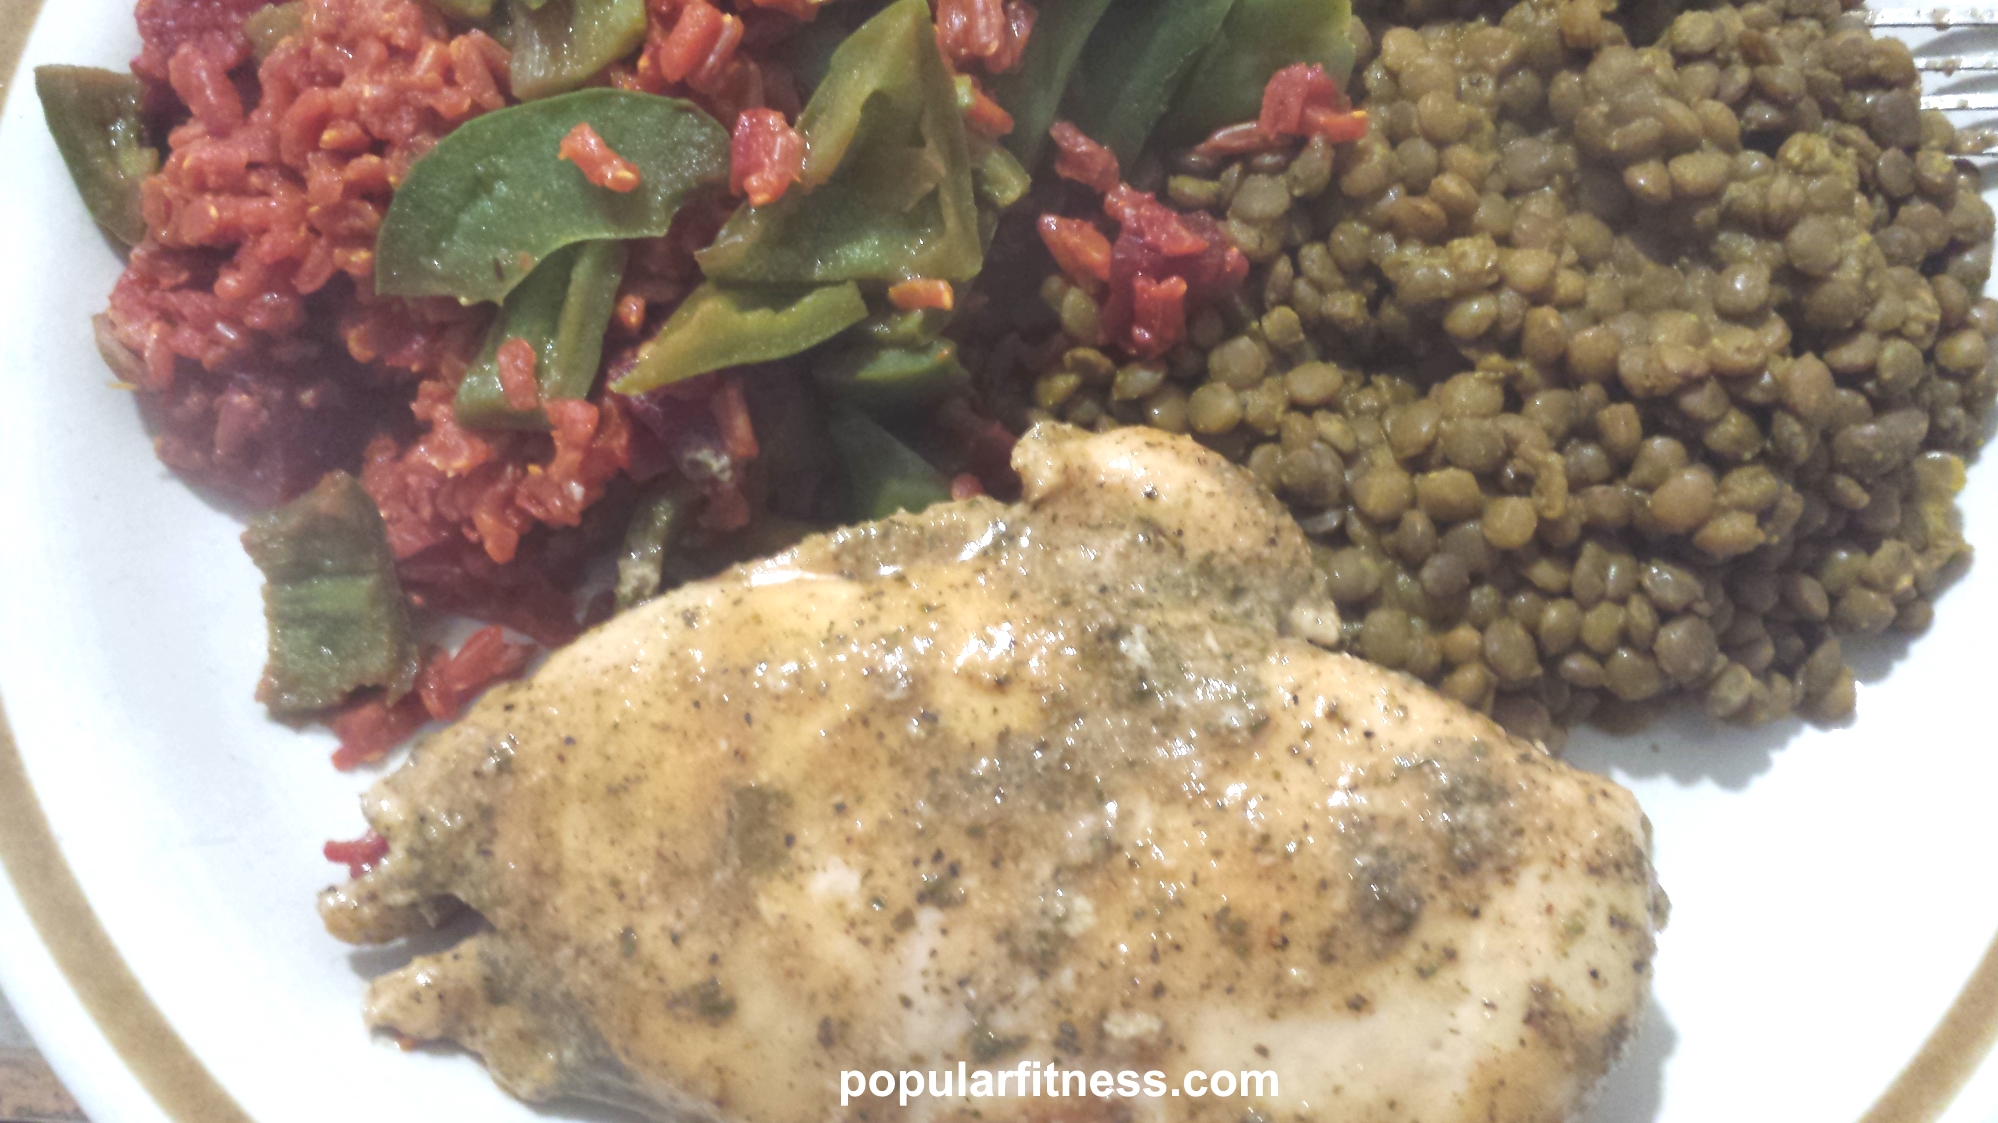 Dinner high in protein, vitamins and minerals - brown lentils, brown rice, chicken breat - Photo by popular fitness